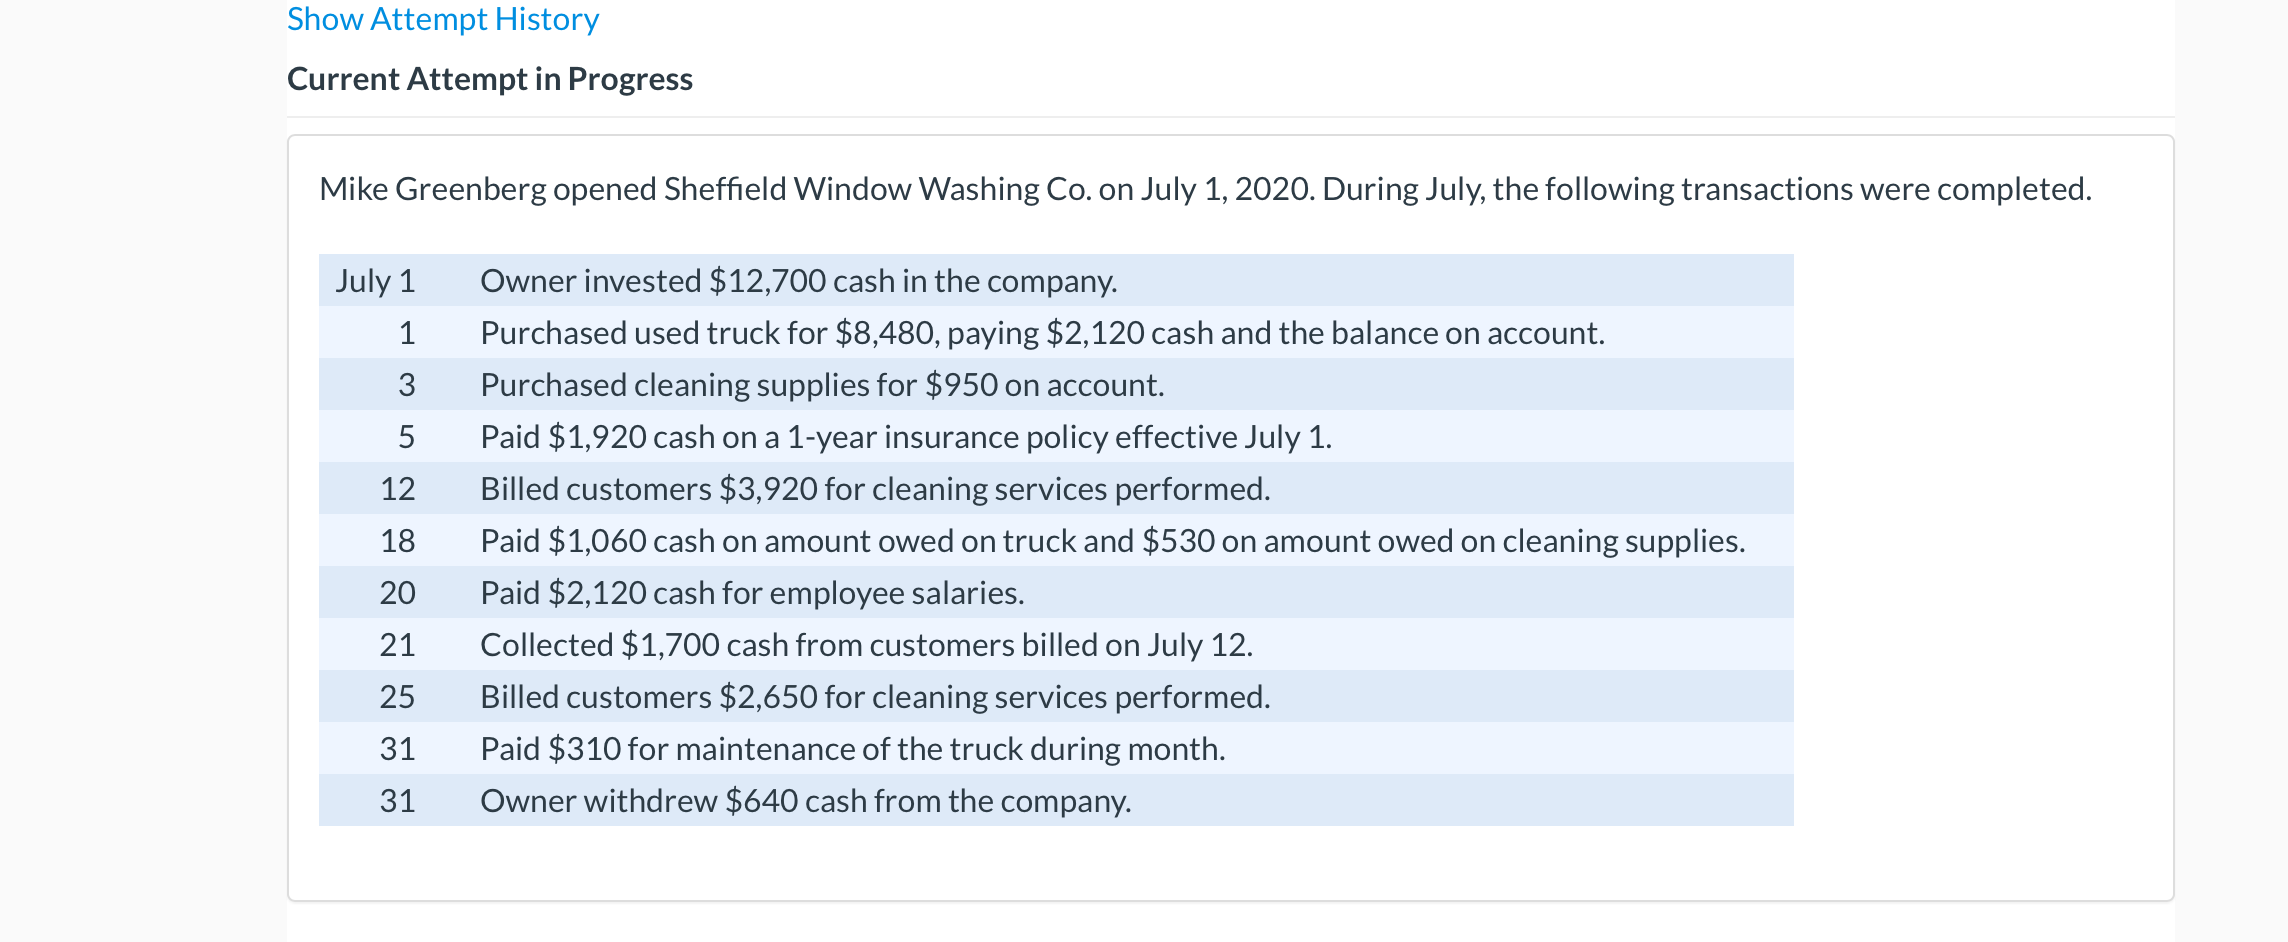 Mike Greenberg opened Sheffield Window Washing Co. on July 1, 2020. During July, the following transactions were completed.
July 1
Owner invested $12,700 cash in the company.
1
Purchased used truck for $8,480, paying $2,120 cash and the balance on account.
3
Purchased cleaning supplies for $950 on account.
5
Paid $1,920 cash on a 1-year insurance policy effective July 1.
12
Billed customers $3,920 for cleaning services performed.
18
Paid $1,060 cash on amount owed on truck and $530 on amount owed on cleaning supplies.
20
Paid $2,120 cash for employee salaries.
21
Collected $1,700 cash from customers billed on July 12.
25
Billed customers $2,650 for cleaning services performed.
31
Paid $310 for maintenance of the truck during month.
31
Owner withdrew $640 cash from the company.
